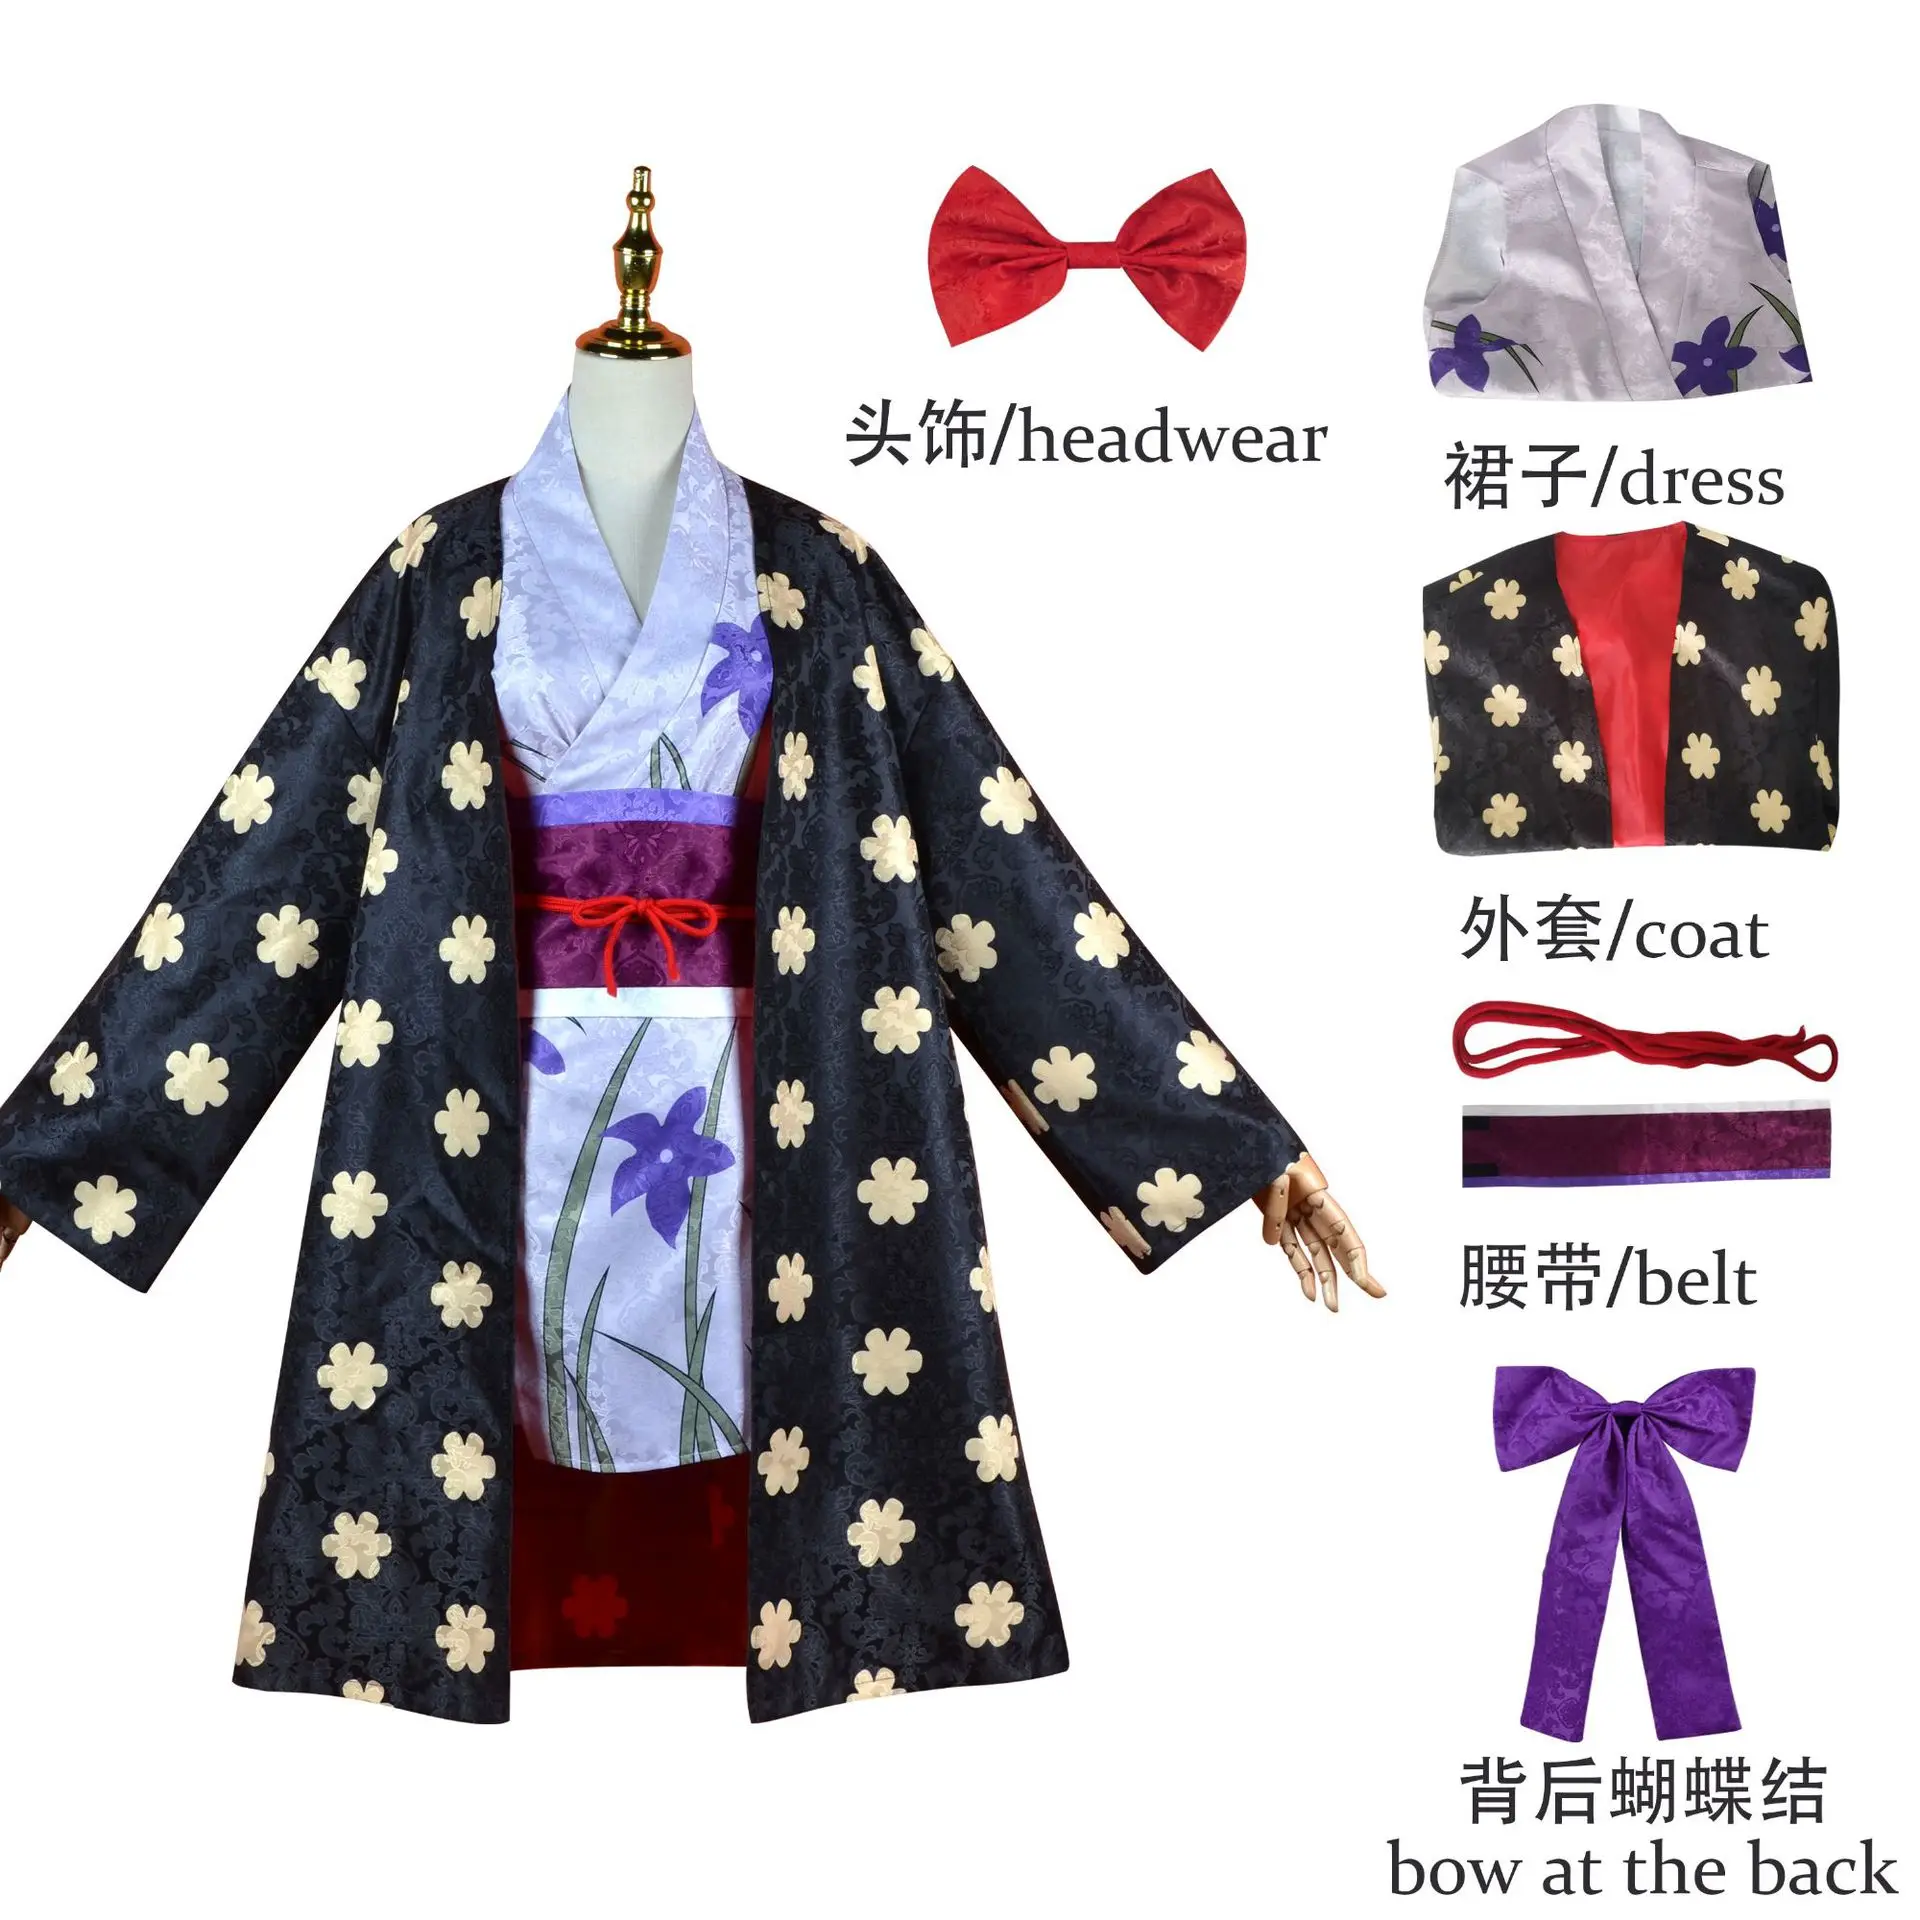 

Anime One Piece Nico Robin Cosplay Costume Kimono Cloak Belt Outfits Fantasia Women Girls Halloween Carnival Party Disguise Suit